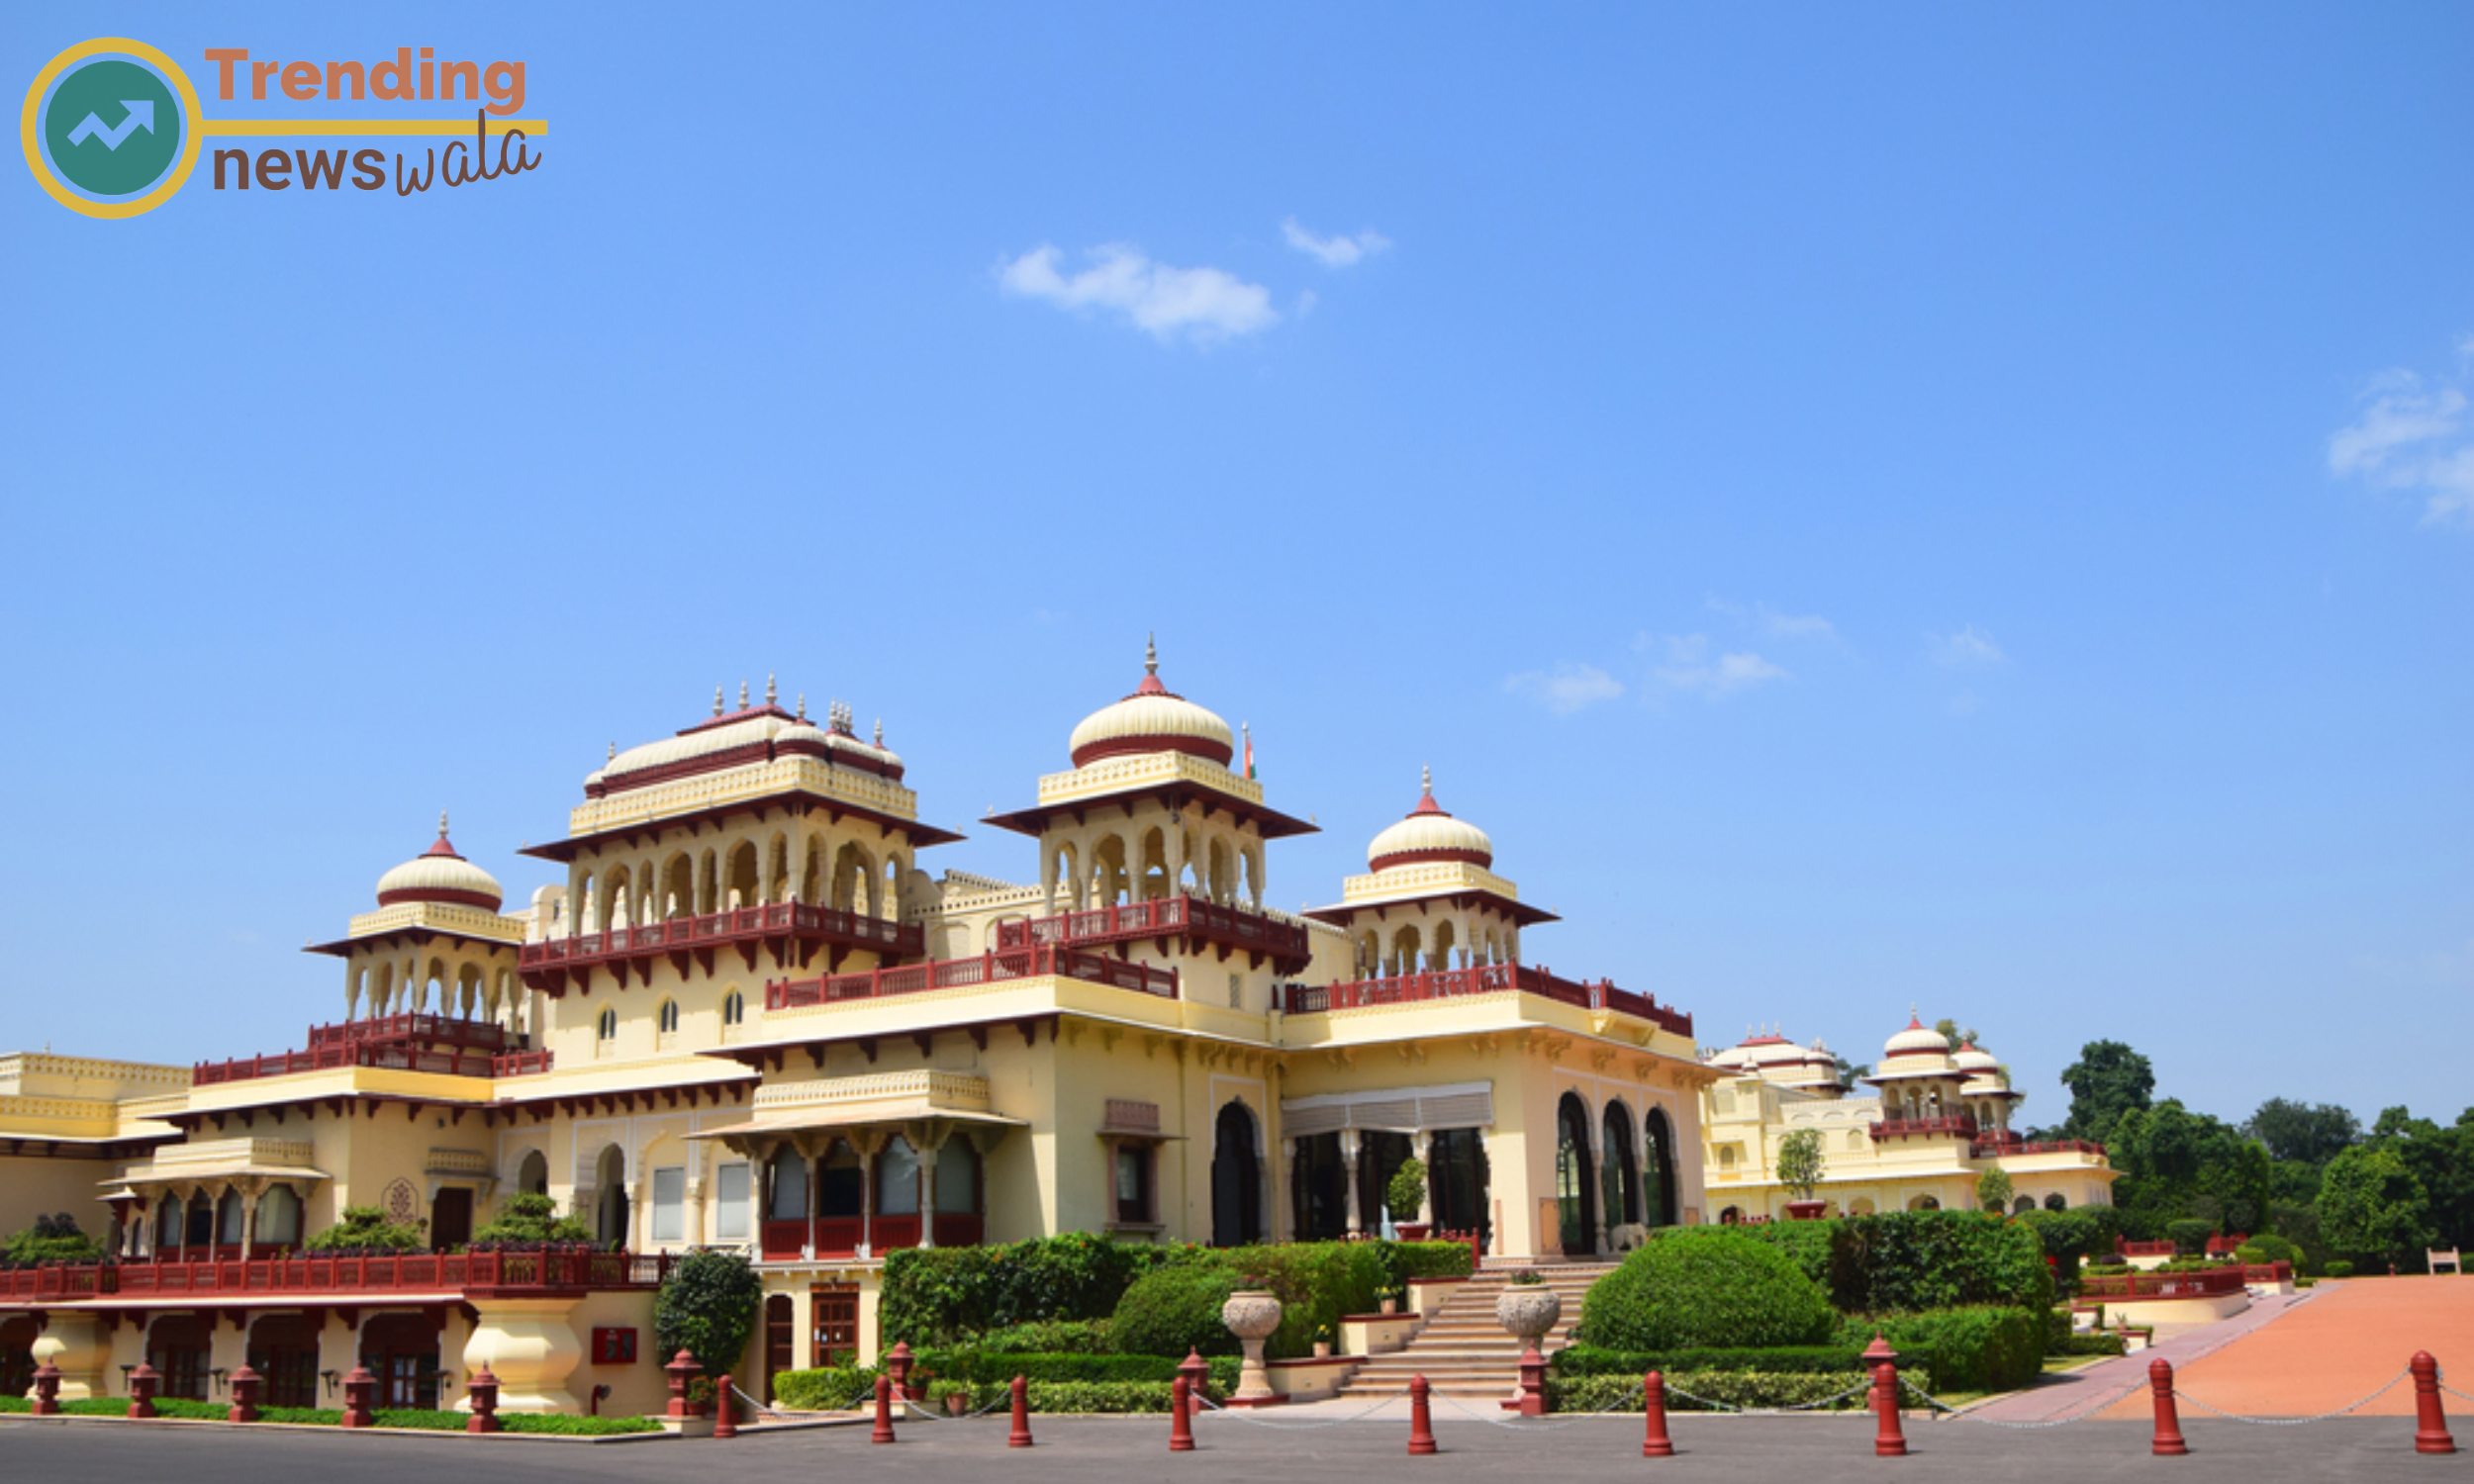 Rambagh Palace is an opulent heritage hotel located in Jaipur